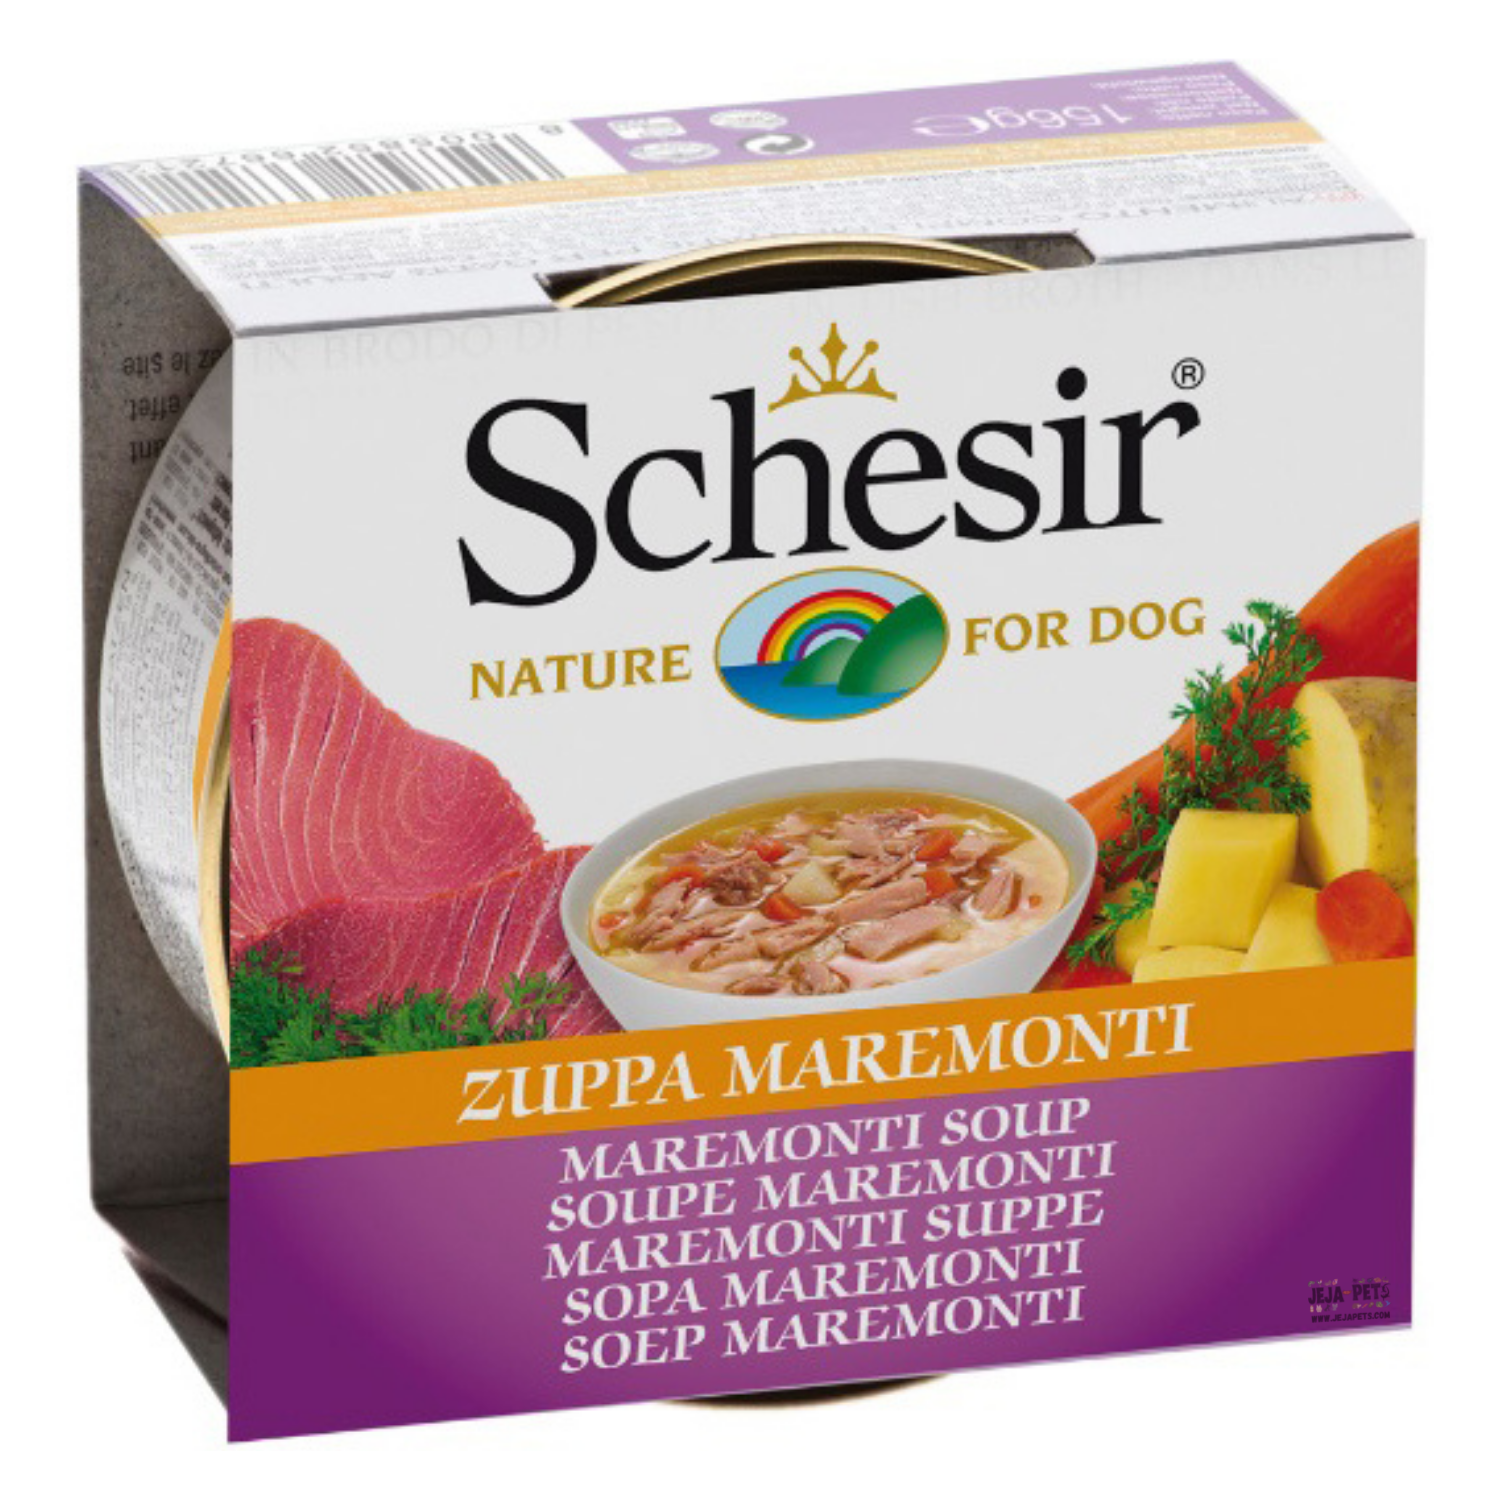 [DISCONTINUED] Schesir Can Soup (Maremonti) for Dogs - 156g